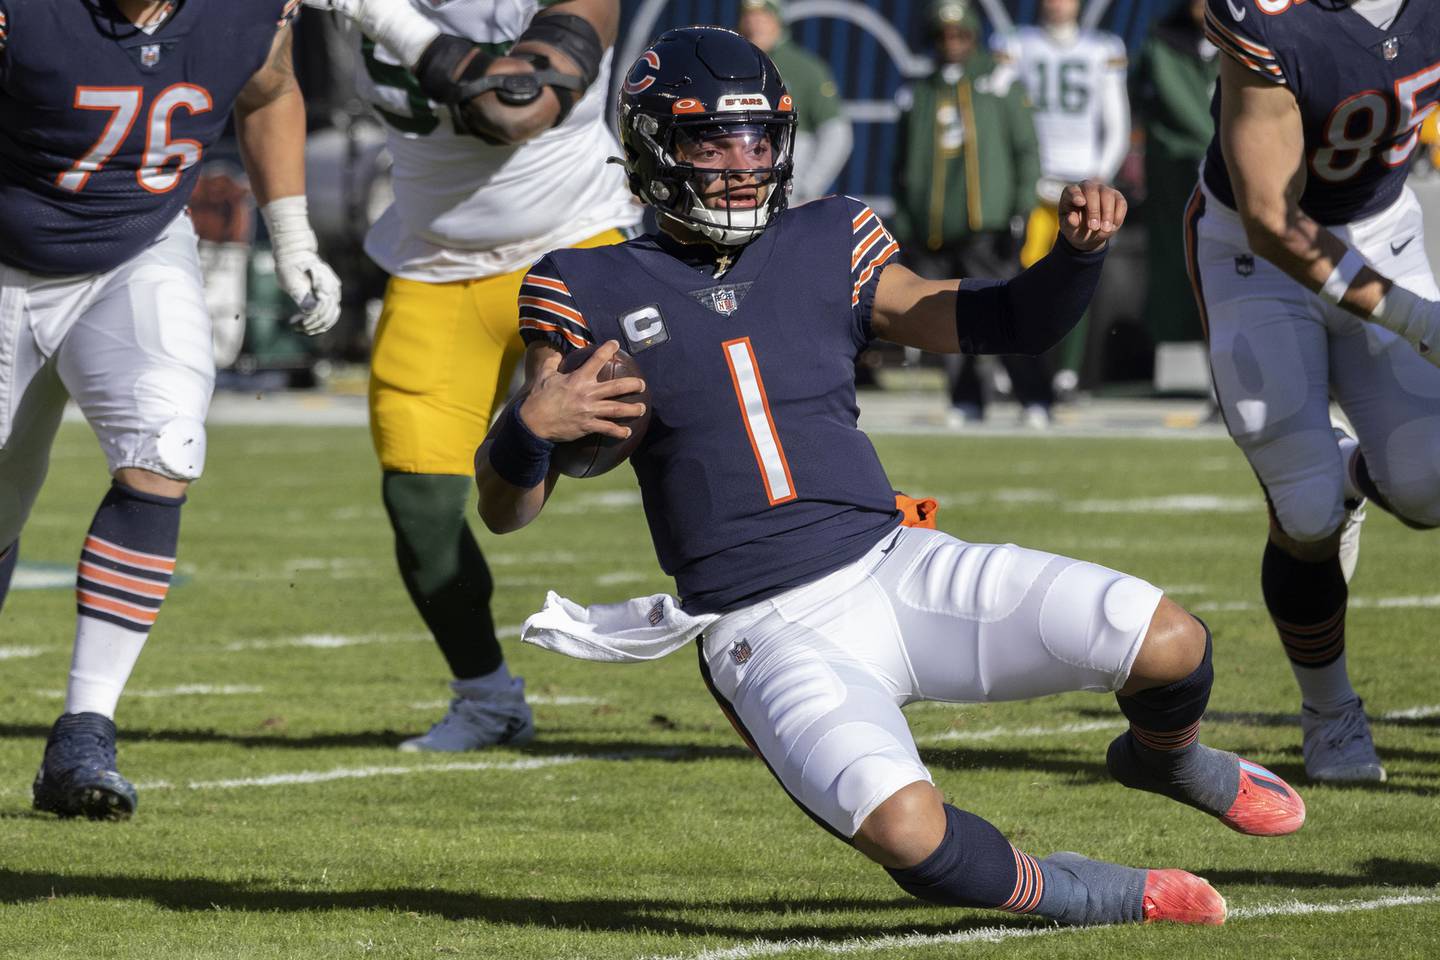 Bears quarterback Justin Fields runs the ball during the first quarter against the Packers on Dec. 4 at Soldier Field. Fields needs 95 rushing yards to become the third quarterback in NFL history to rush for 1,000 yards in a season. 